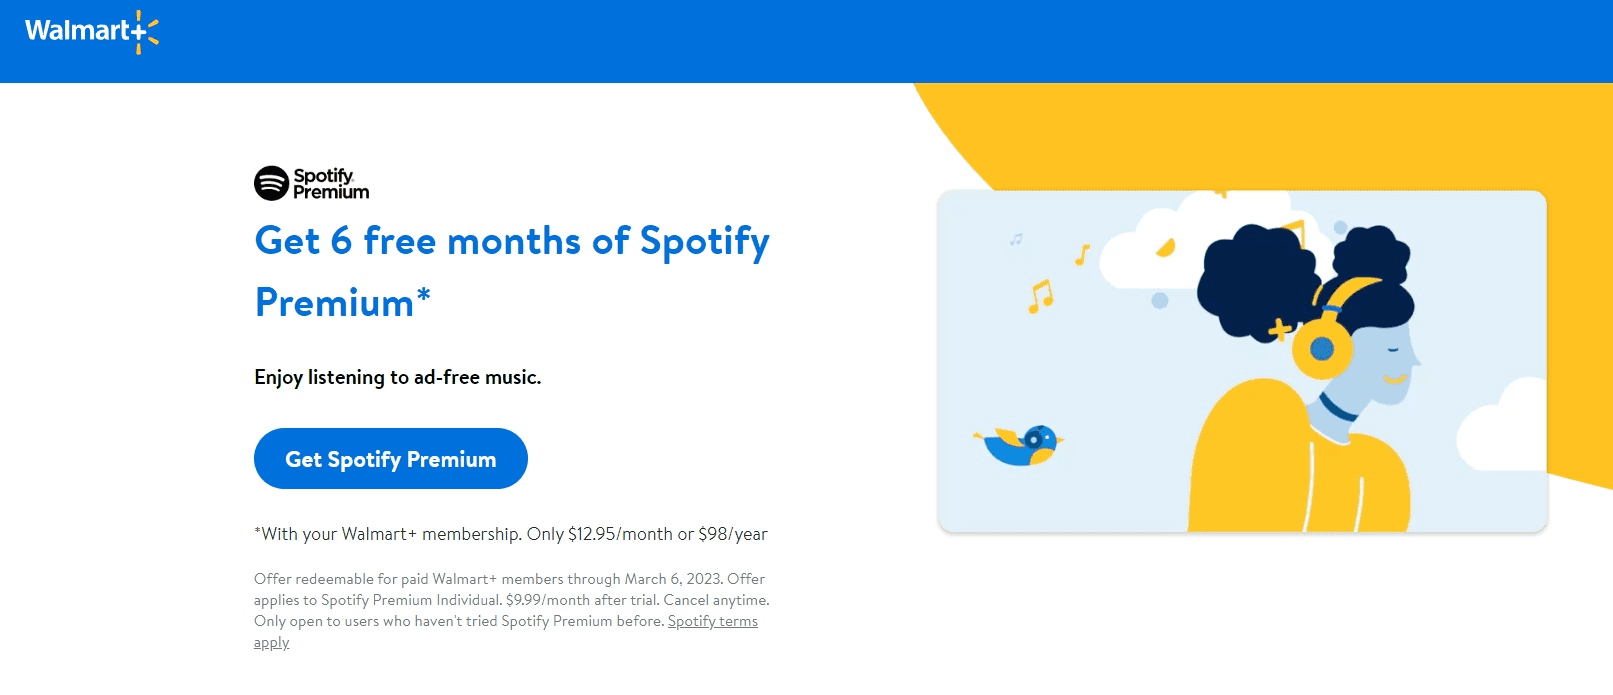 Get Spotify for free for 6 months with Walmart Plus. How to download Spotify songs without Premium?